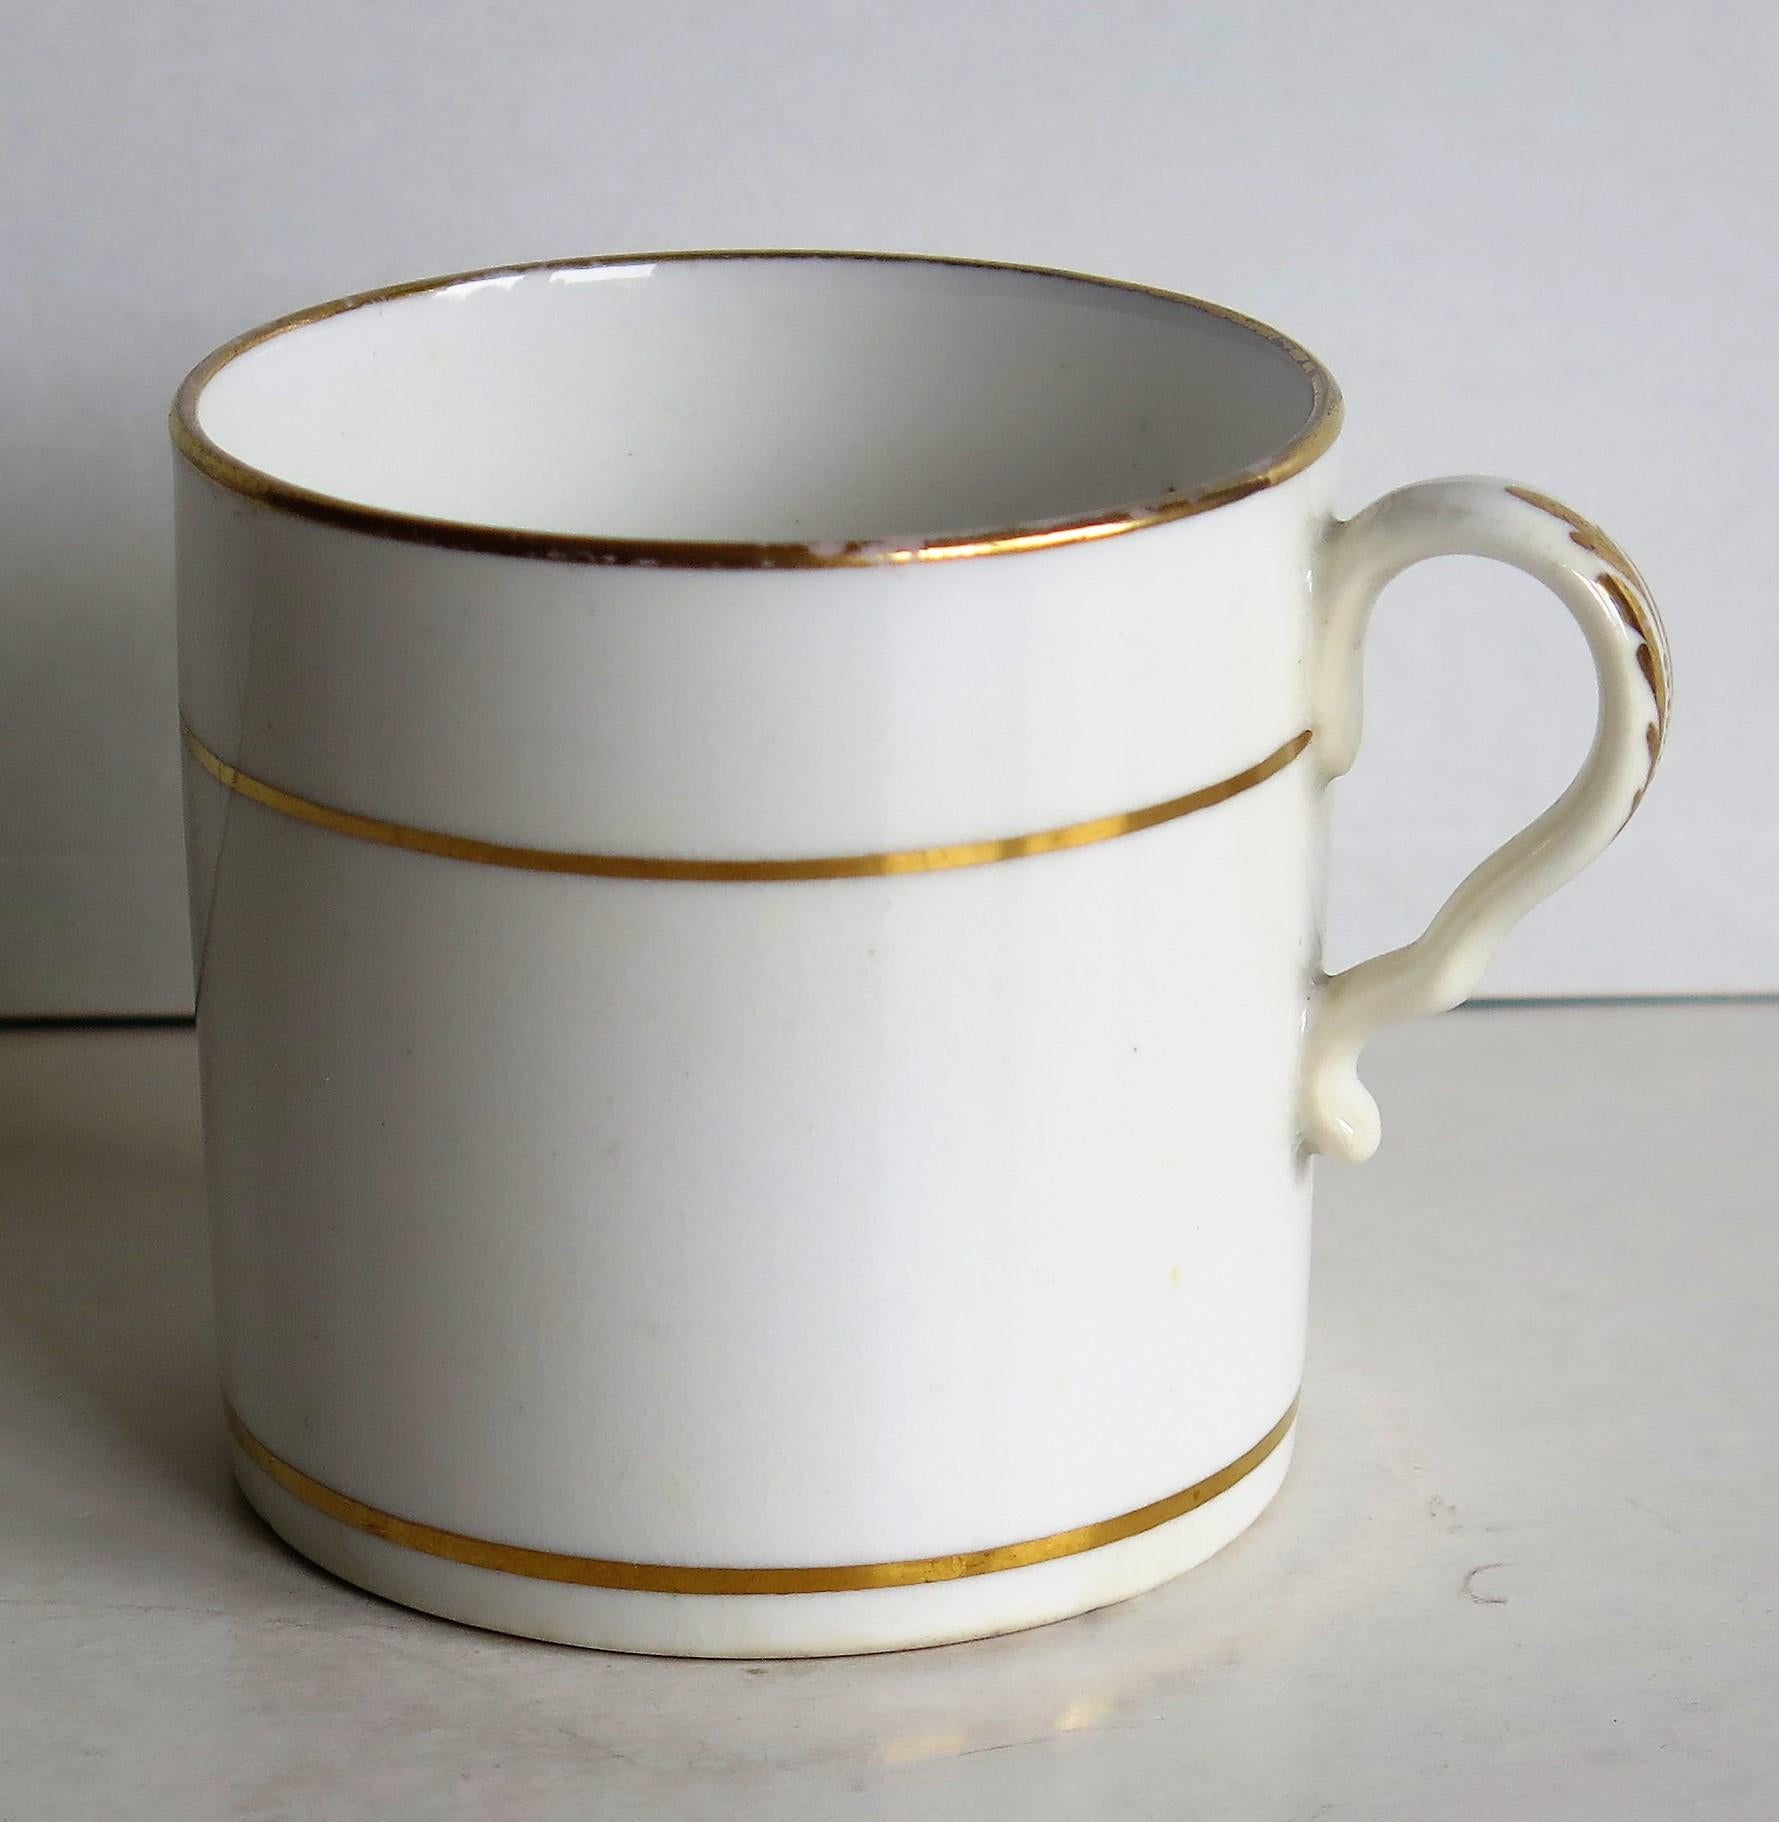 This is a fine example of an English George III, Regency period, porcelain, coffee can (cup), made by Spode in the early 19th century, circa 1810.

The can is nominally straight sided and has the Spode loop handle with a pronounced kick or kink to